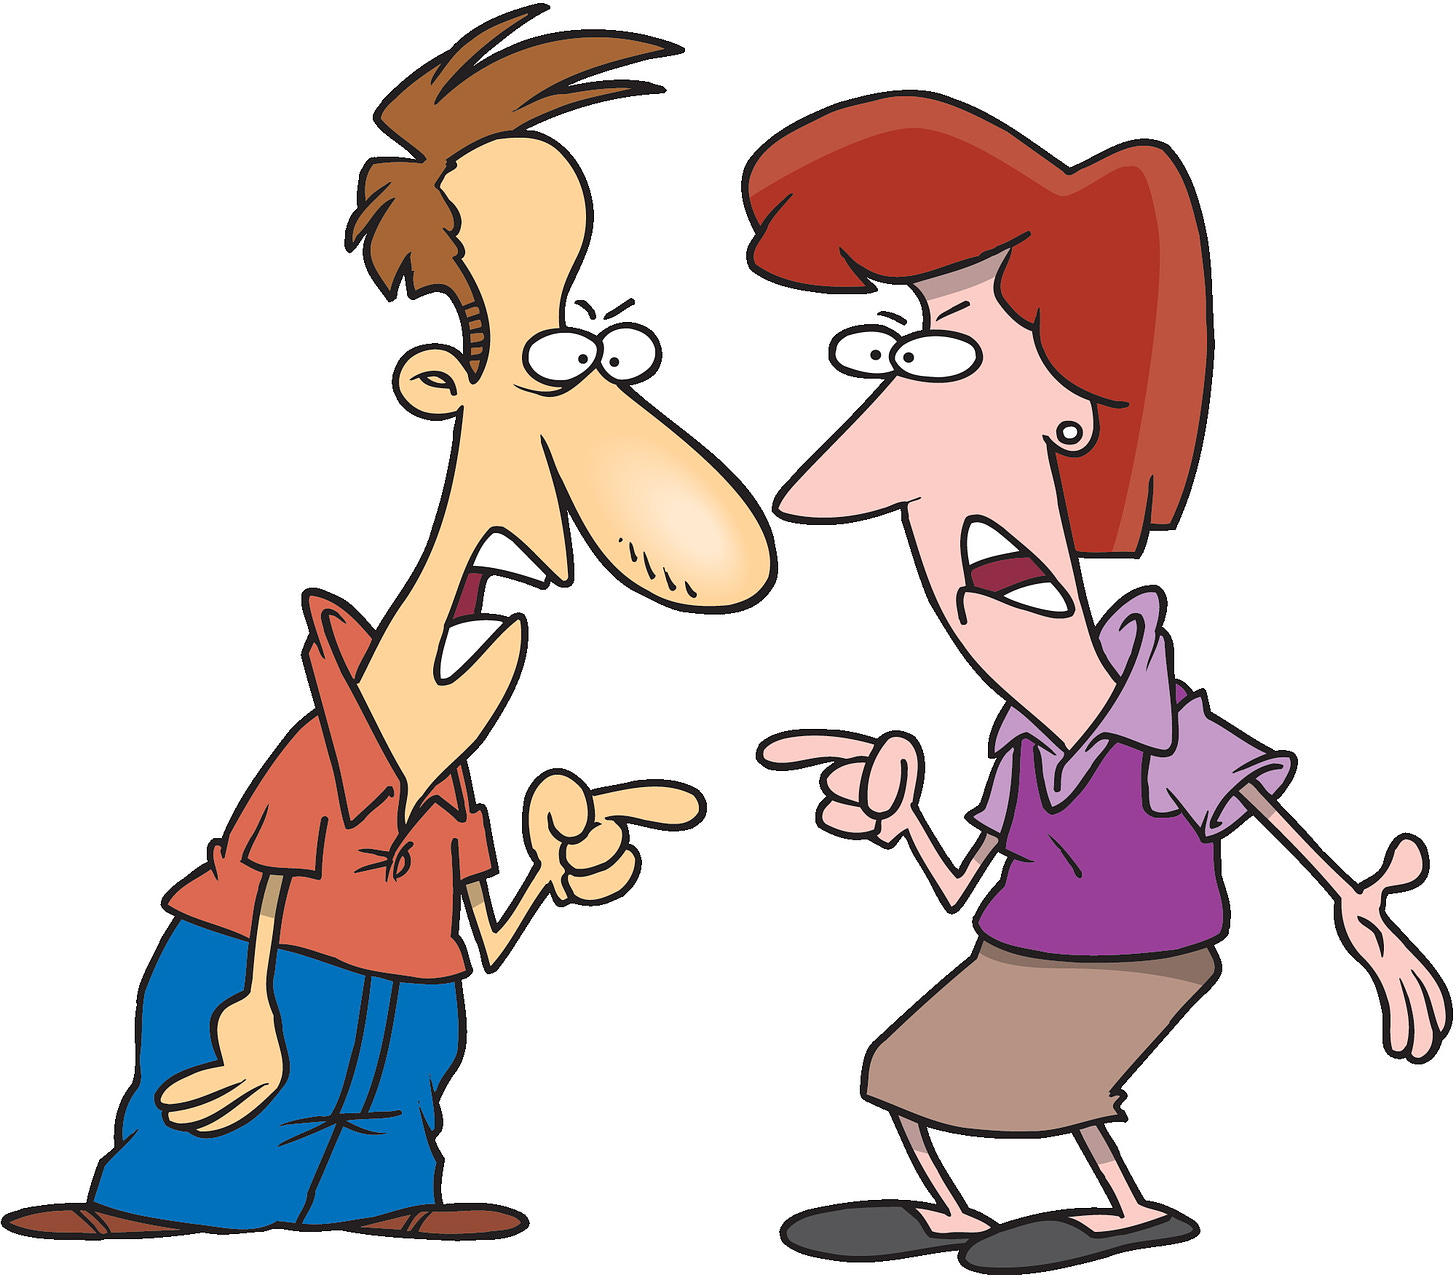 Argument Clip Art drawing free image